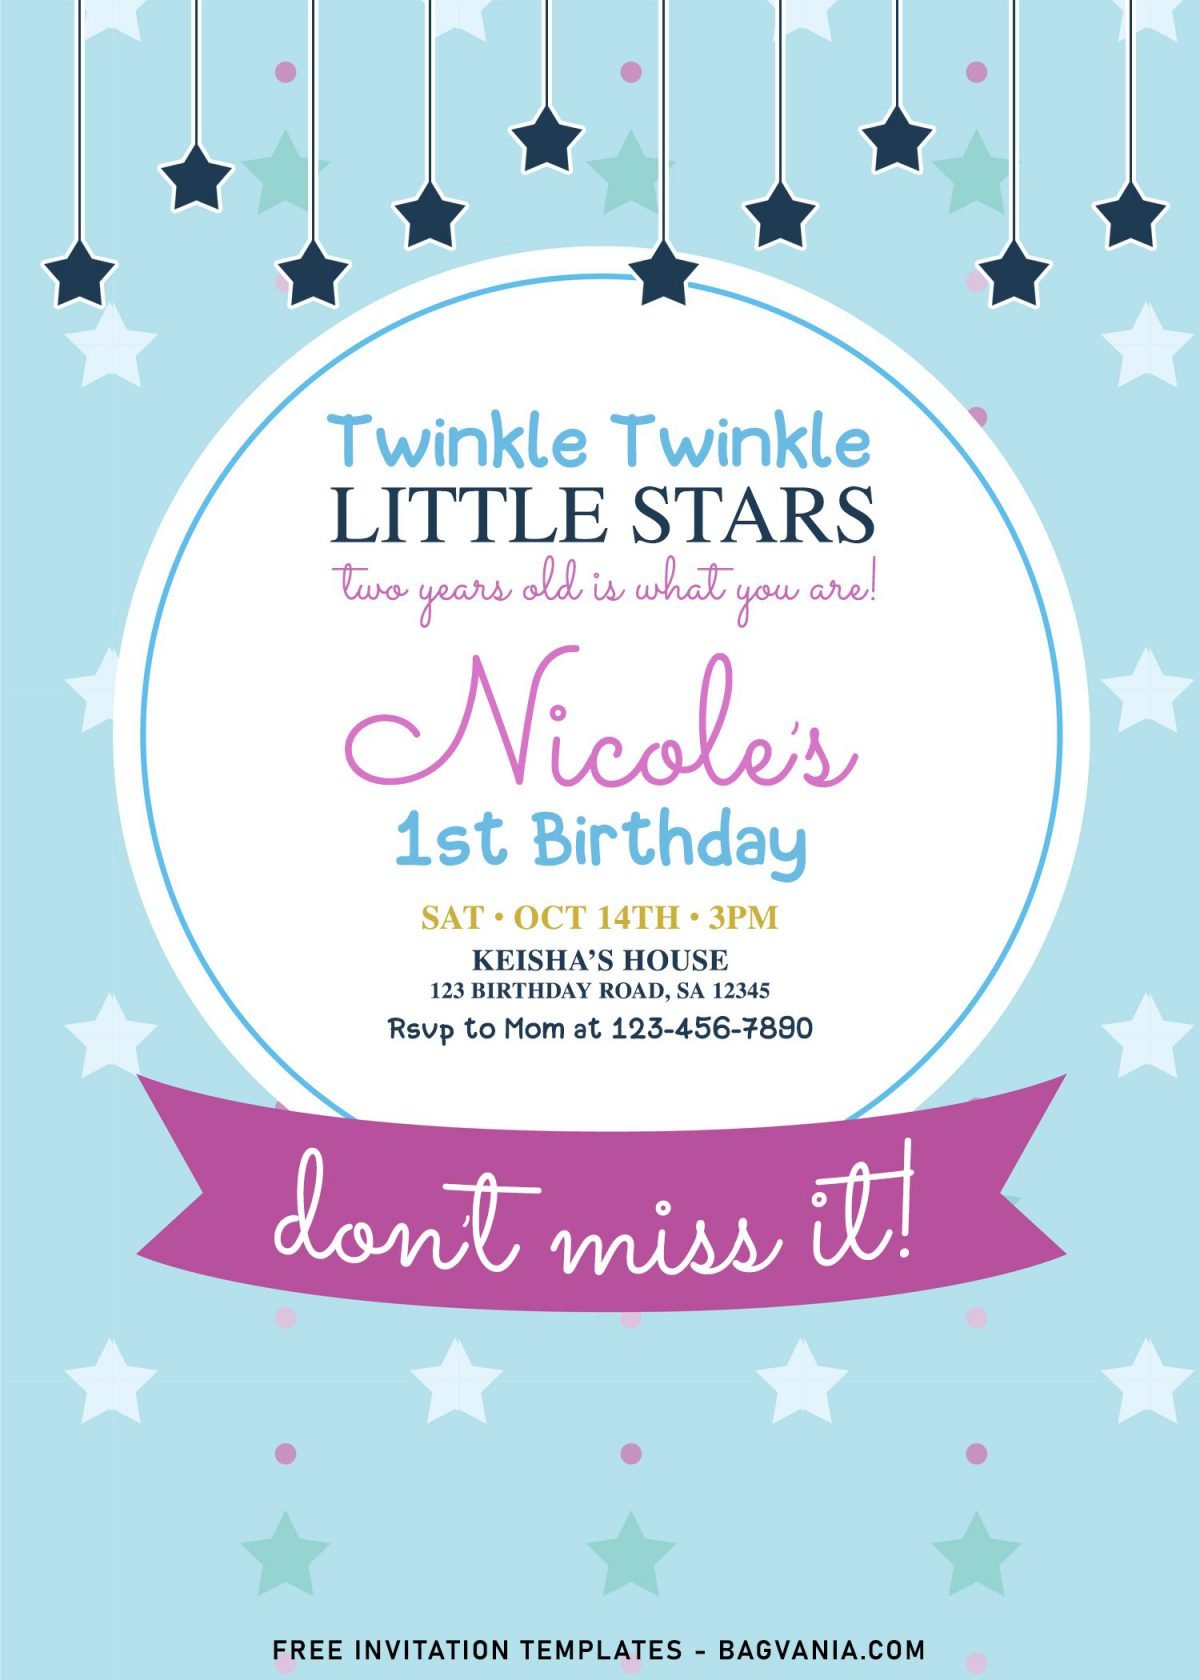 7+ Twinkle Twinkle Little Stars Birthday Invitation Templates For Any Ages